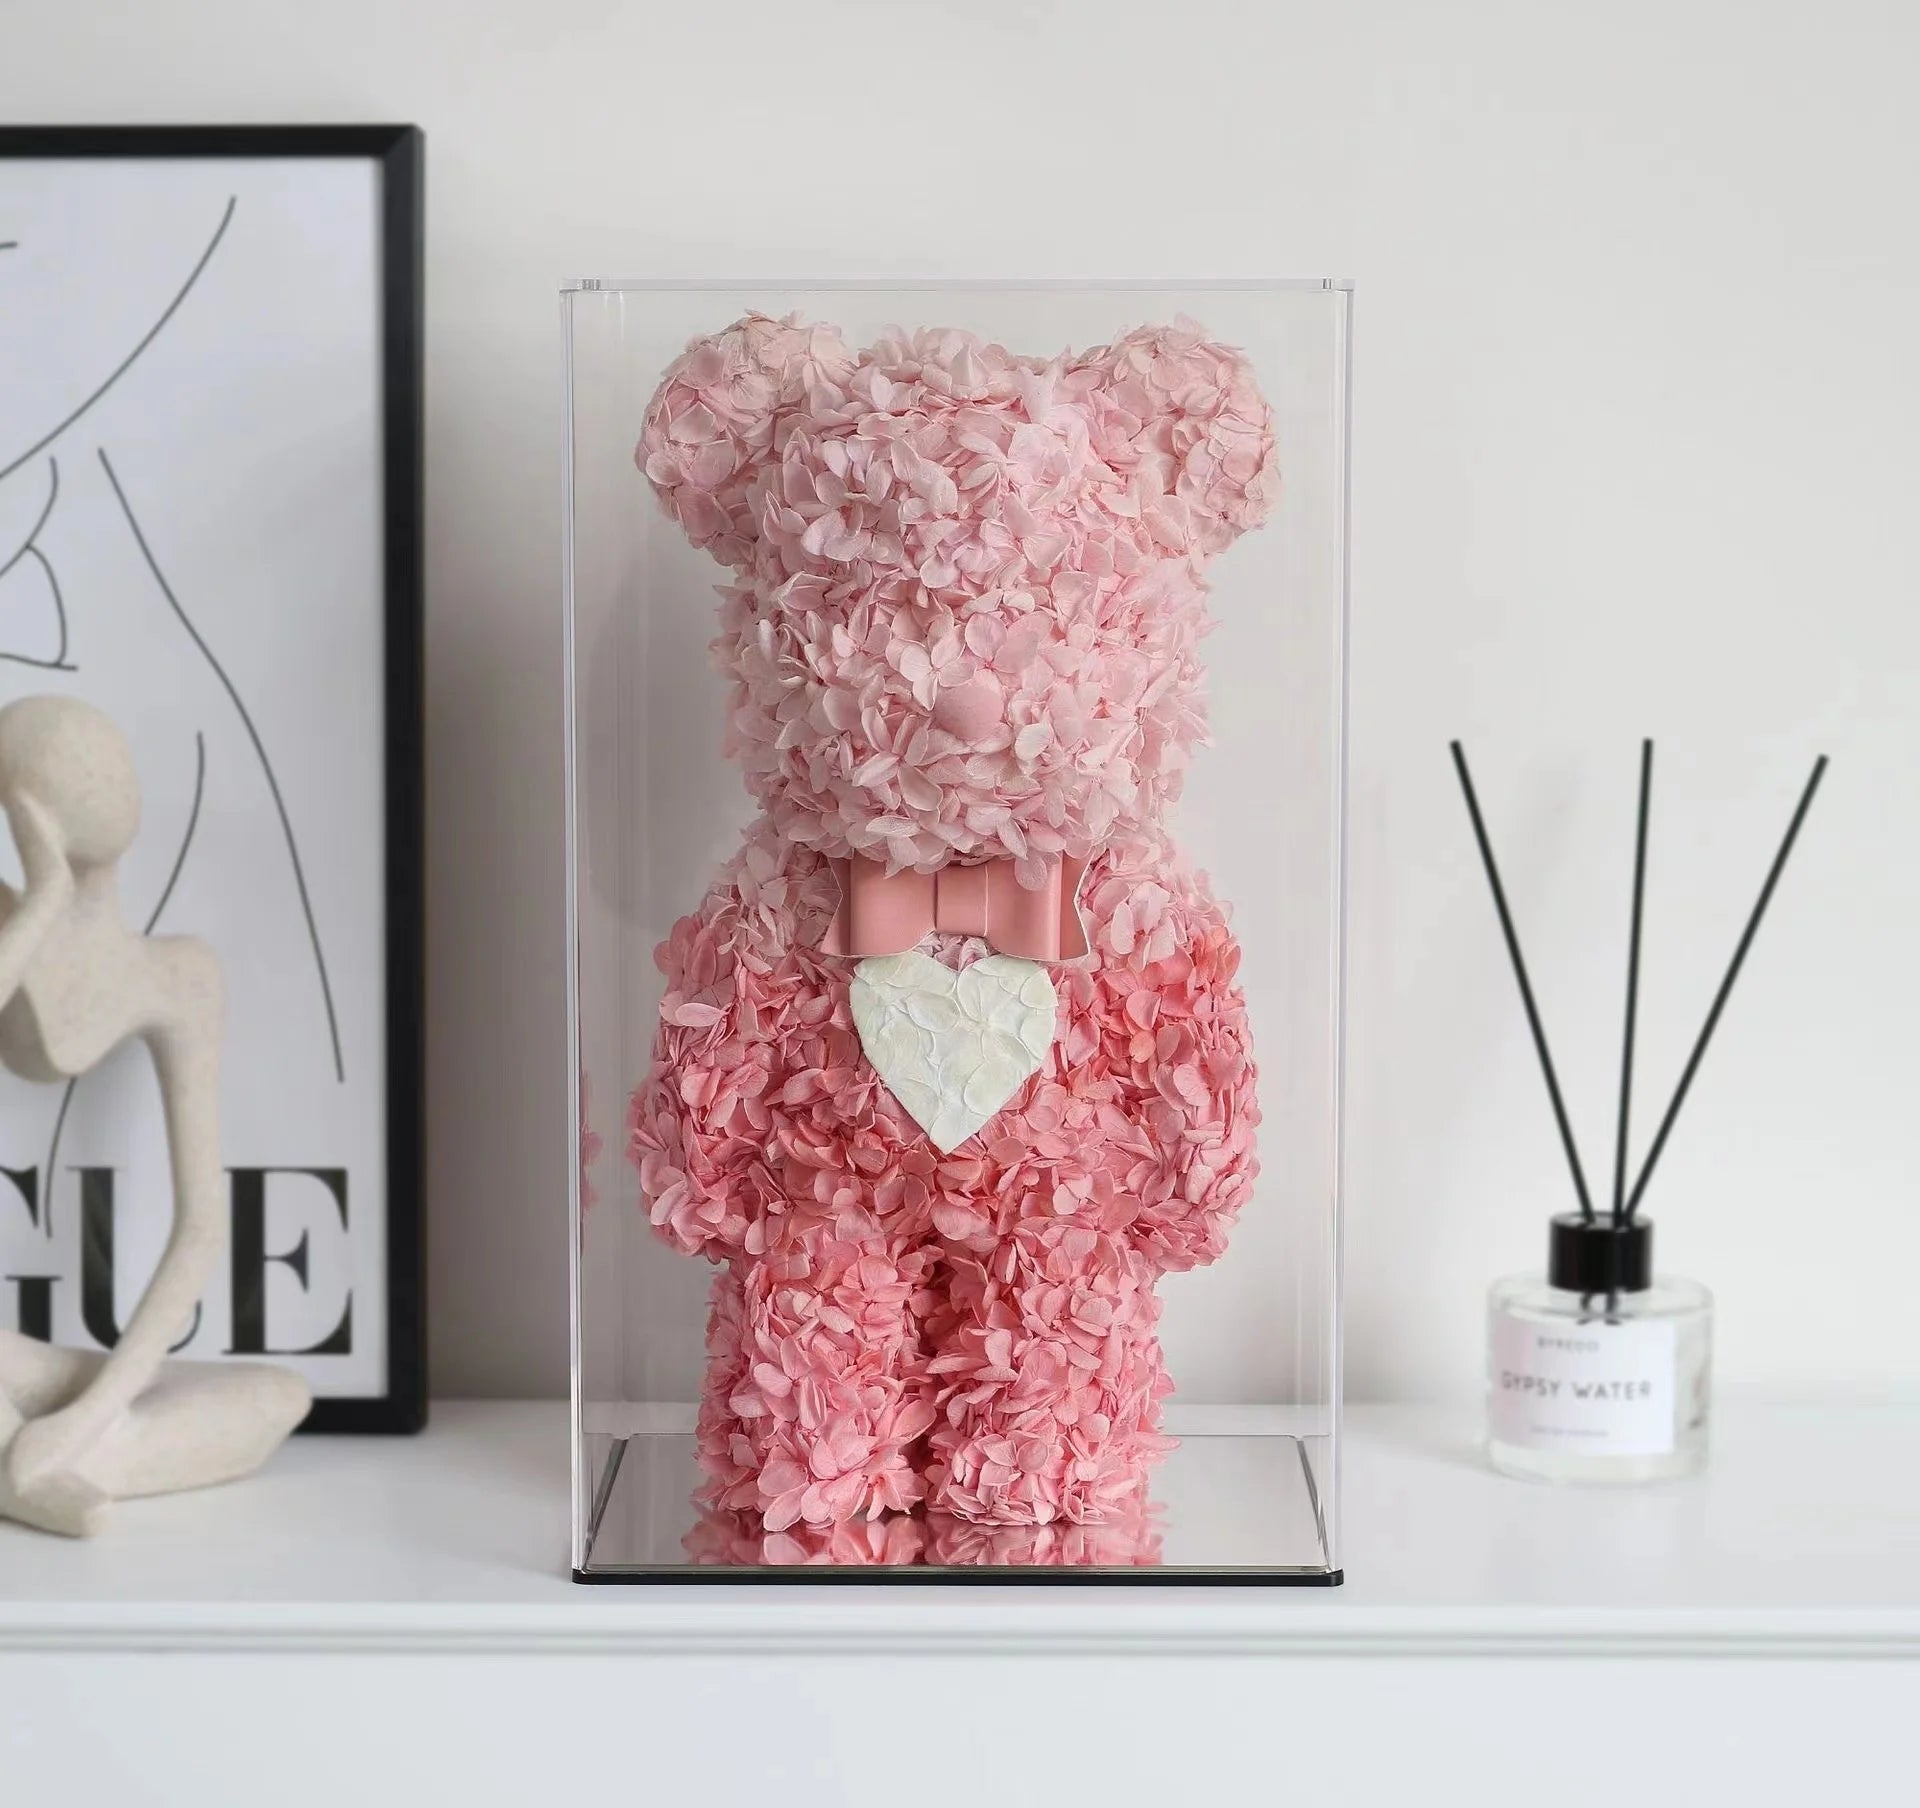 Embrace the soft elegance of our pink Bearbrick figurine, handcrafted from real Preserved Flowers. Florecise. Delicate shades of pink petals intertwine to create a charming piece that adds a touch of romance to any space.